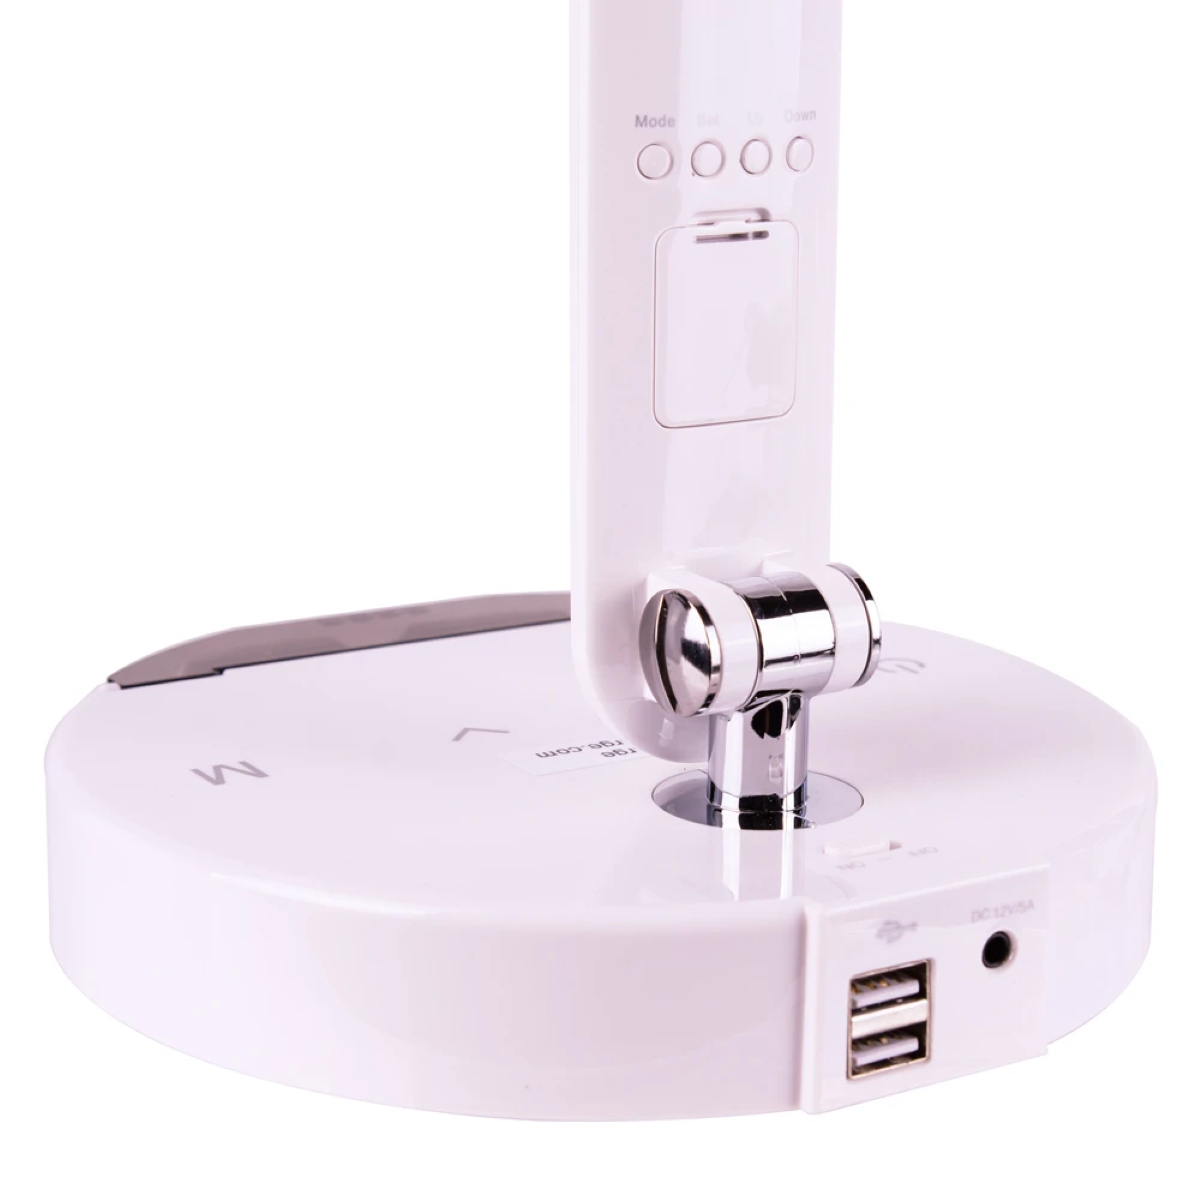 LED Lamp and Universal Phone Dock - Two Additional USB Ports